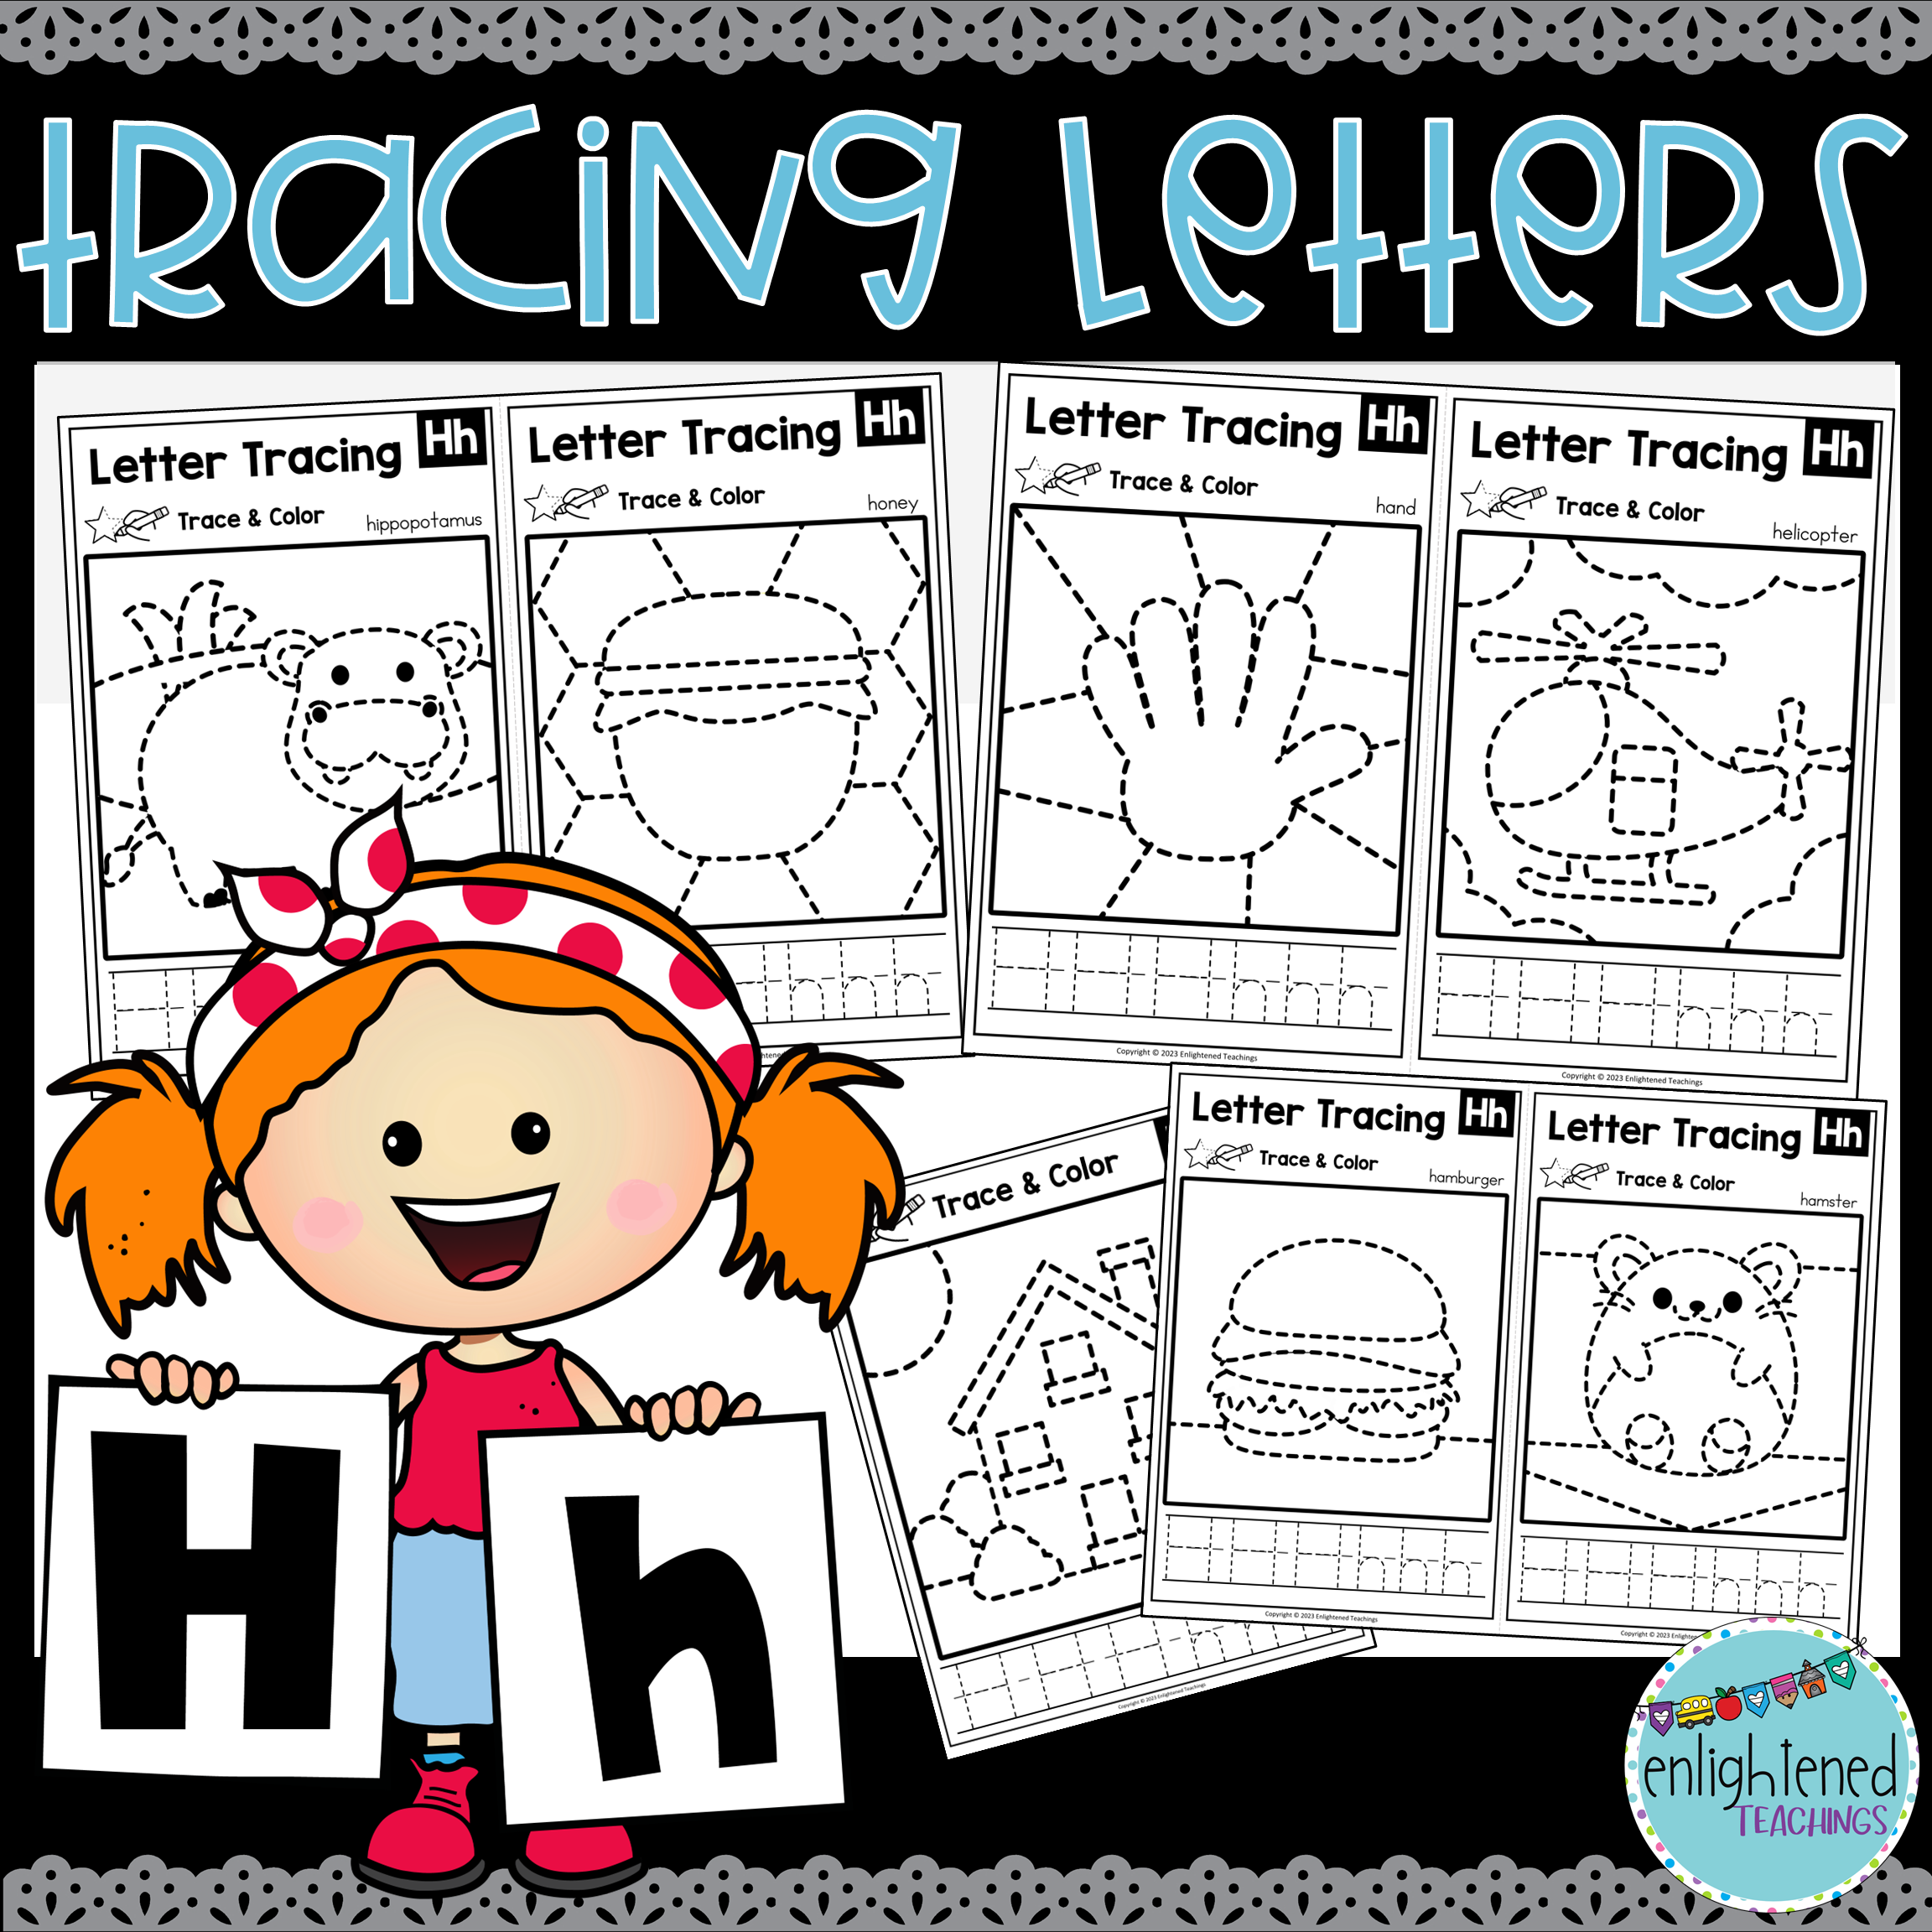 Letter h tracing worksheets letter tracing mats letter h trace color made by teachers